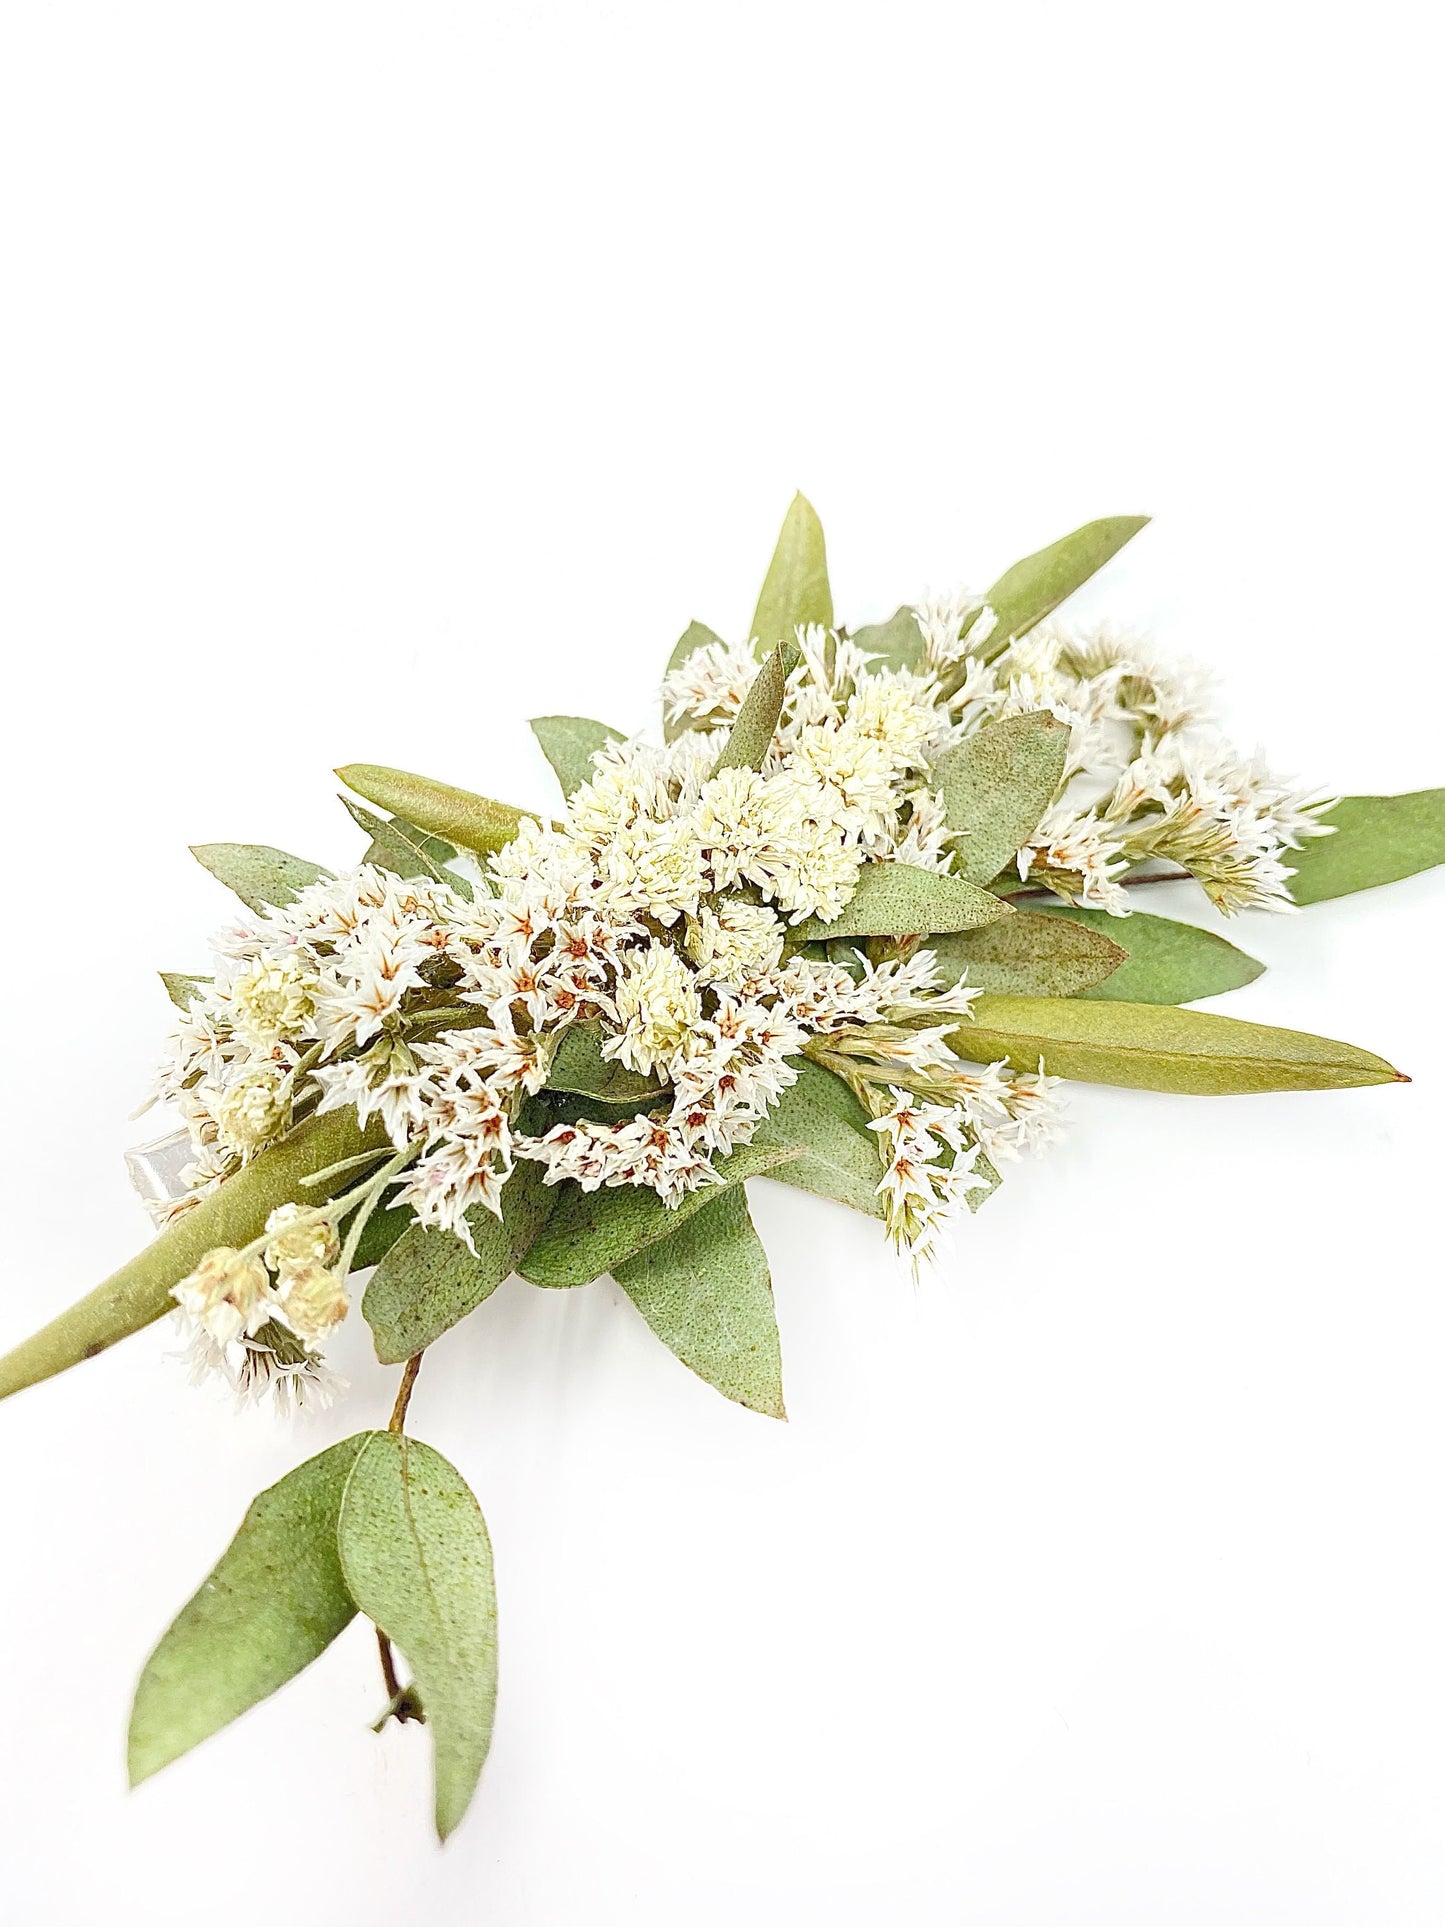 Hair Clip, Dried Flowers, Bridal, Hair Accessories, Wedding Accessories, Greenery, Achillia of Pearl, White and Green